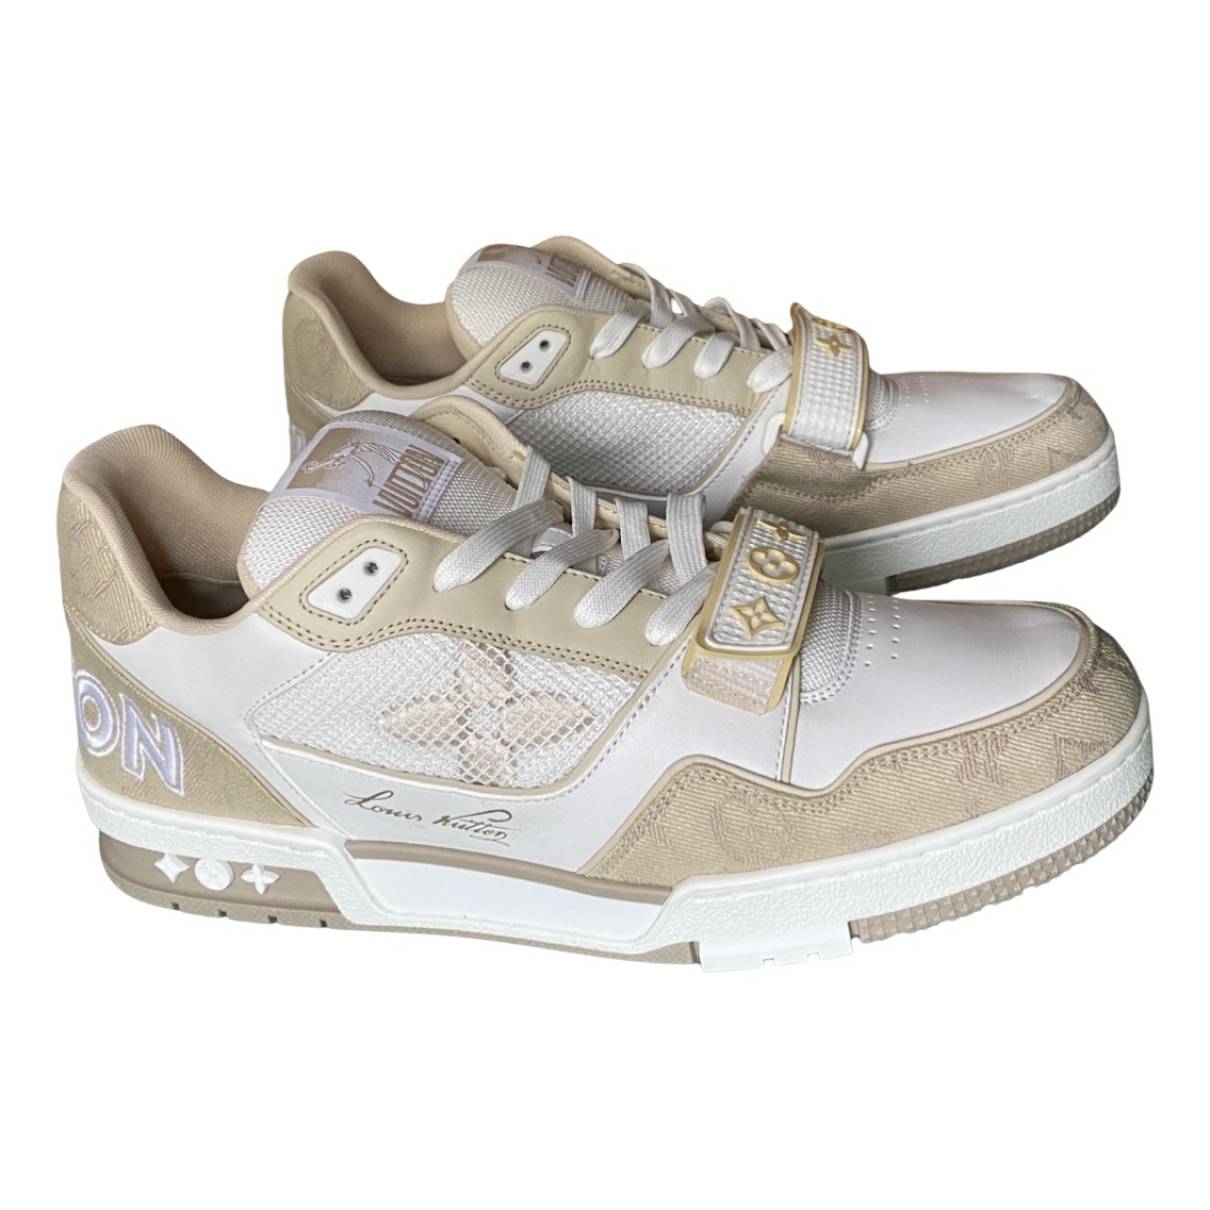 Lv trainer low trainers Louis Vuitton Beige size 6 UK in Other